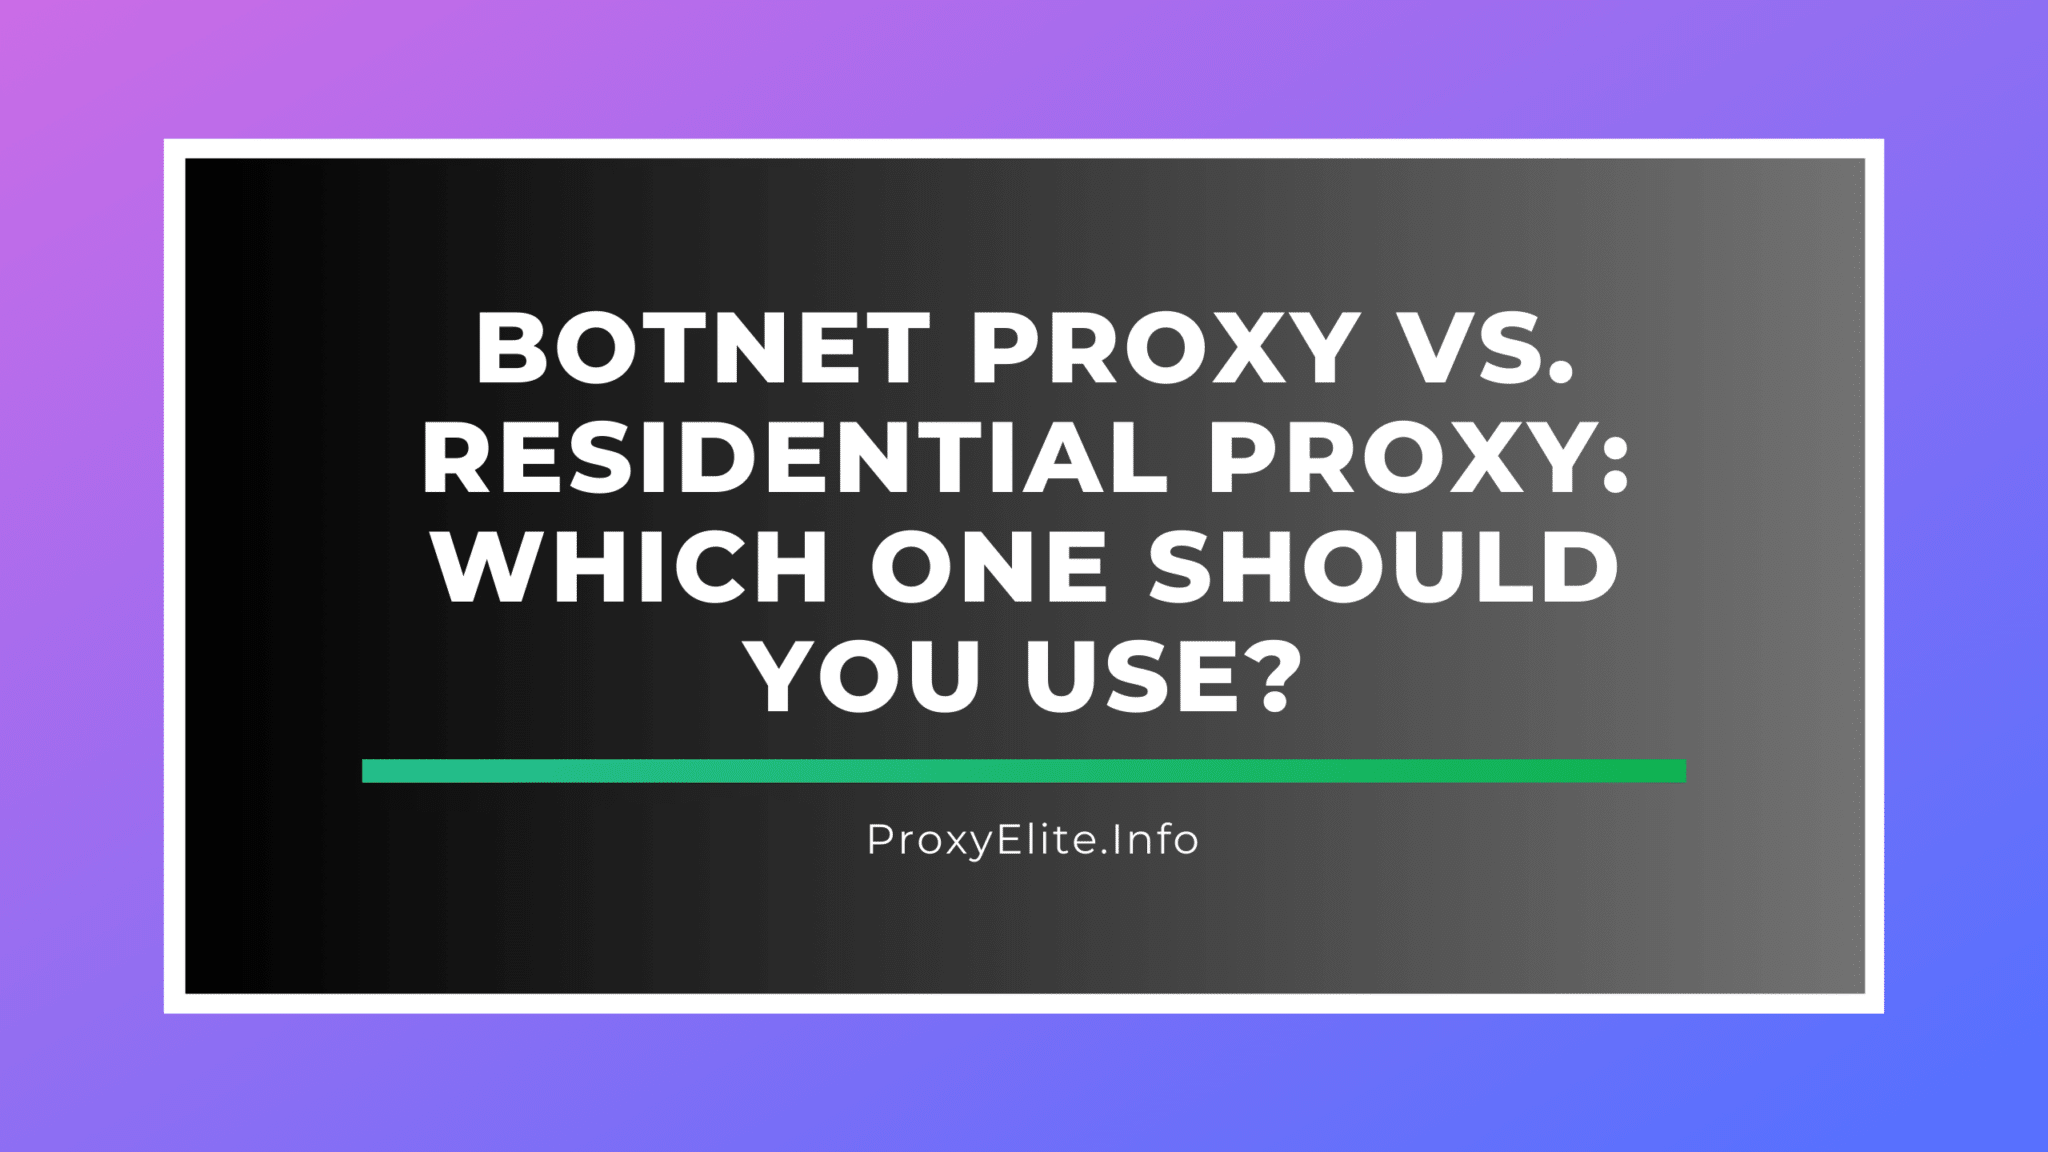 Botnet Proxy vs. Residential Proxy: Which One Should You Use?